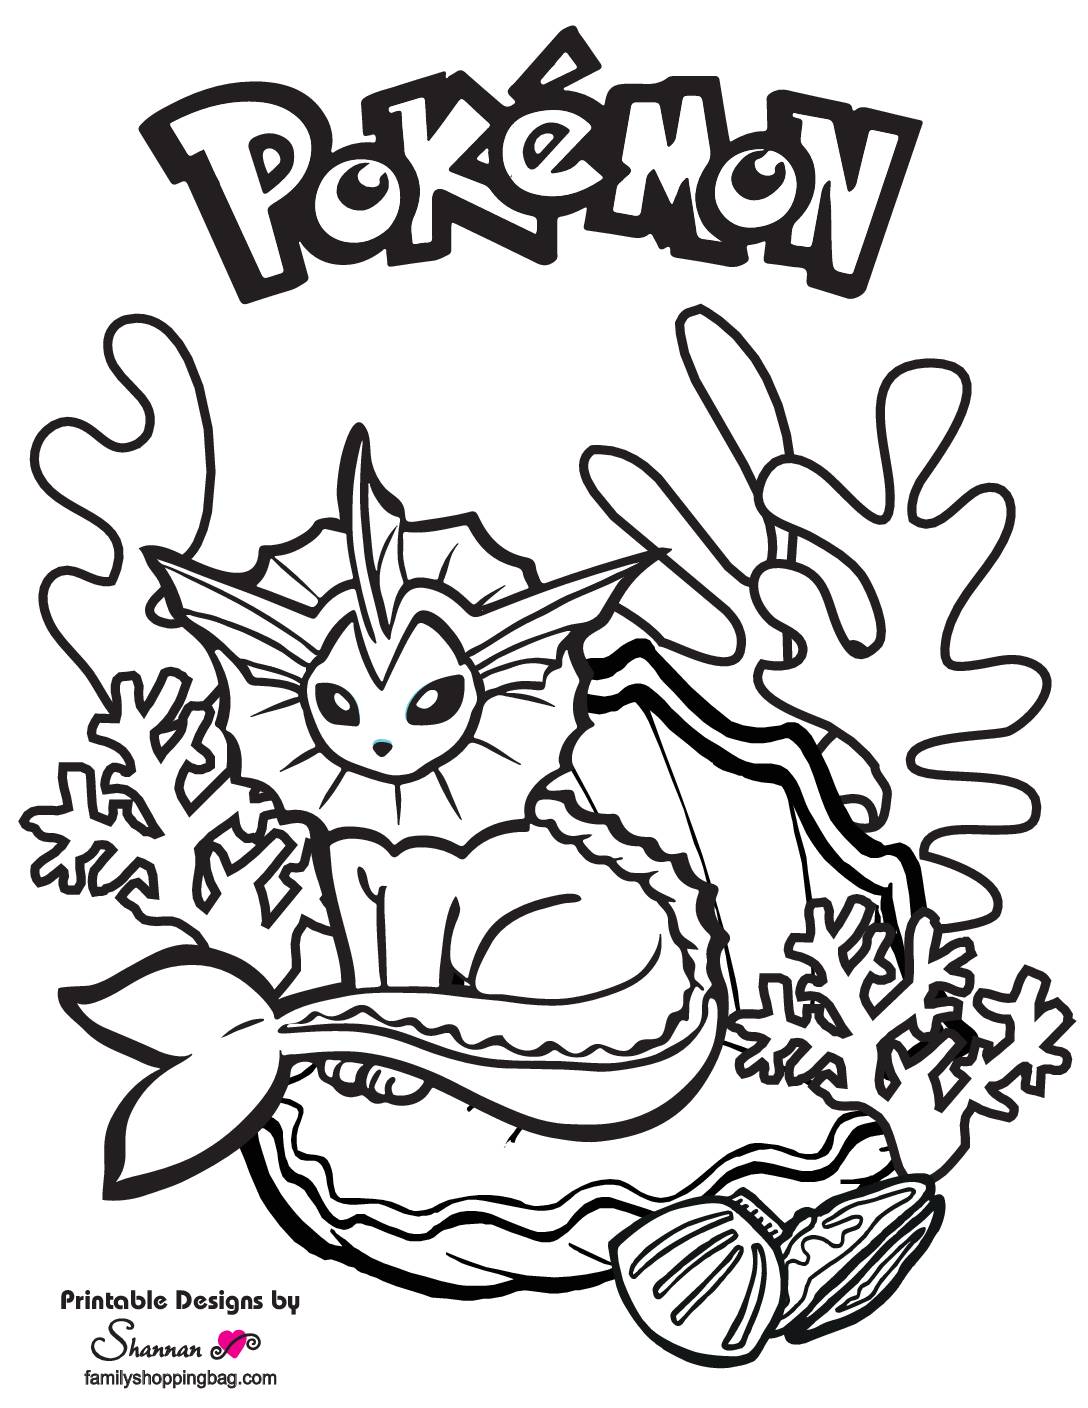 8100-coloring-pages-pokemon-latest-hd-coloring-pages-printable